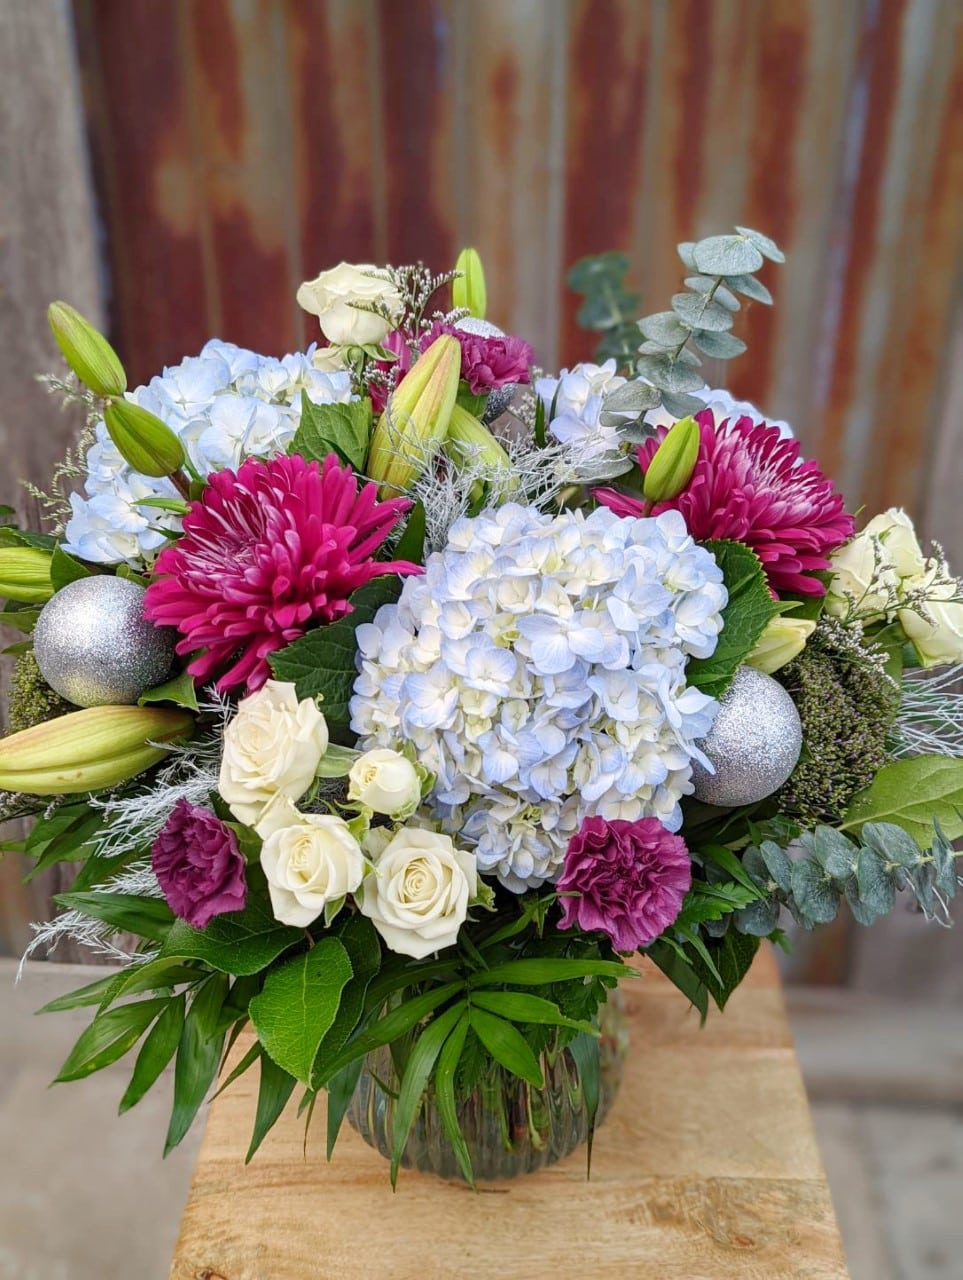 The Watering Can | A large bouquet made with plum, sky blue, and white blooms with silver balls in a blue glass vase.